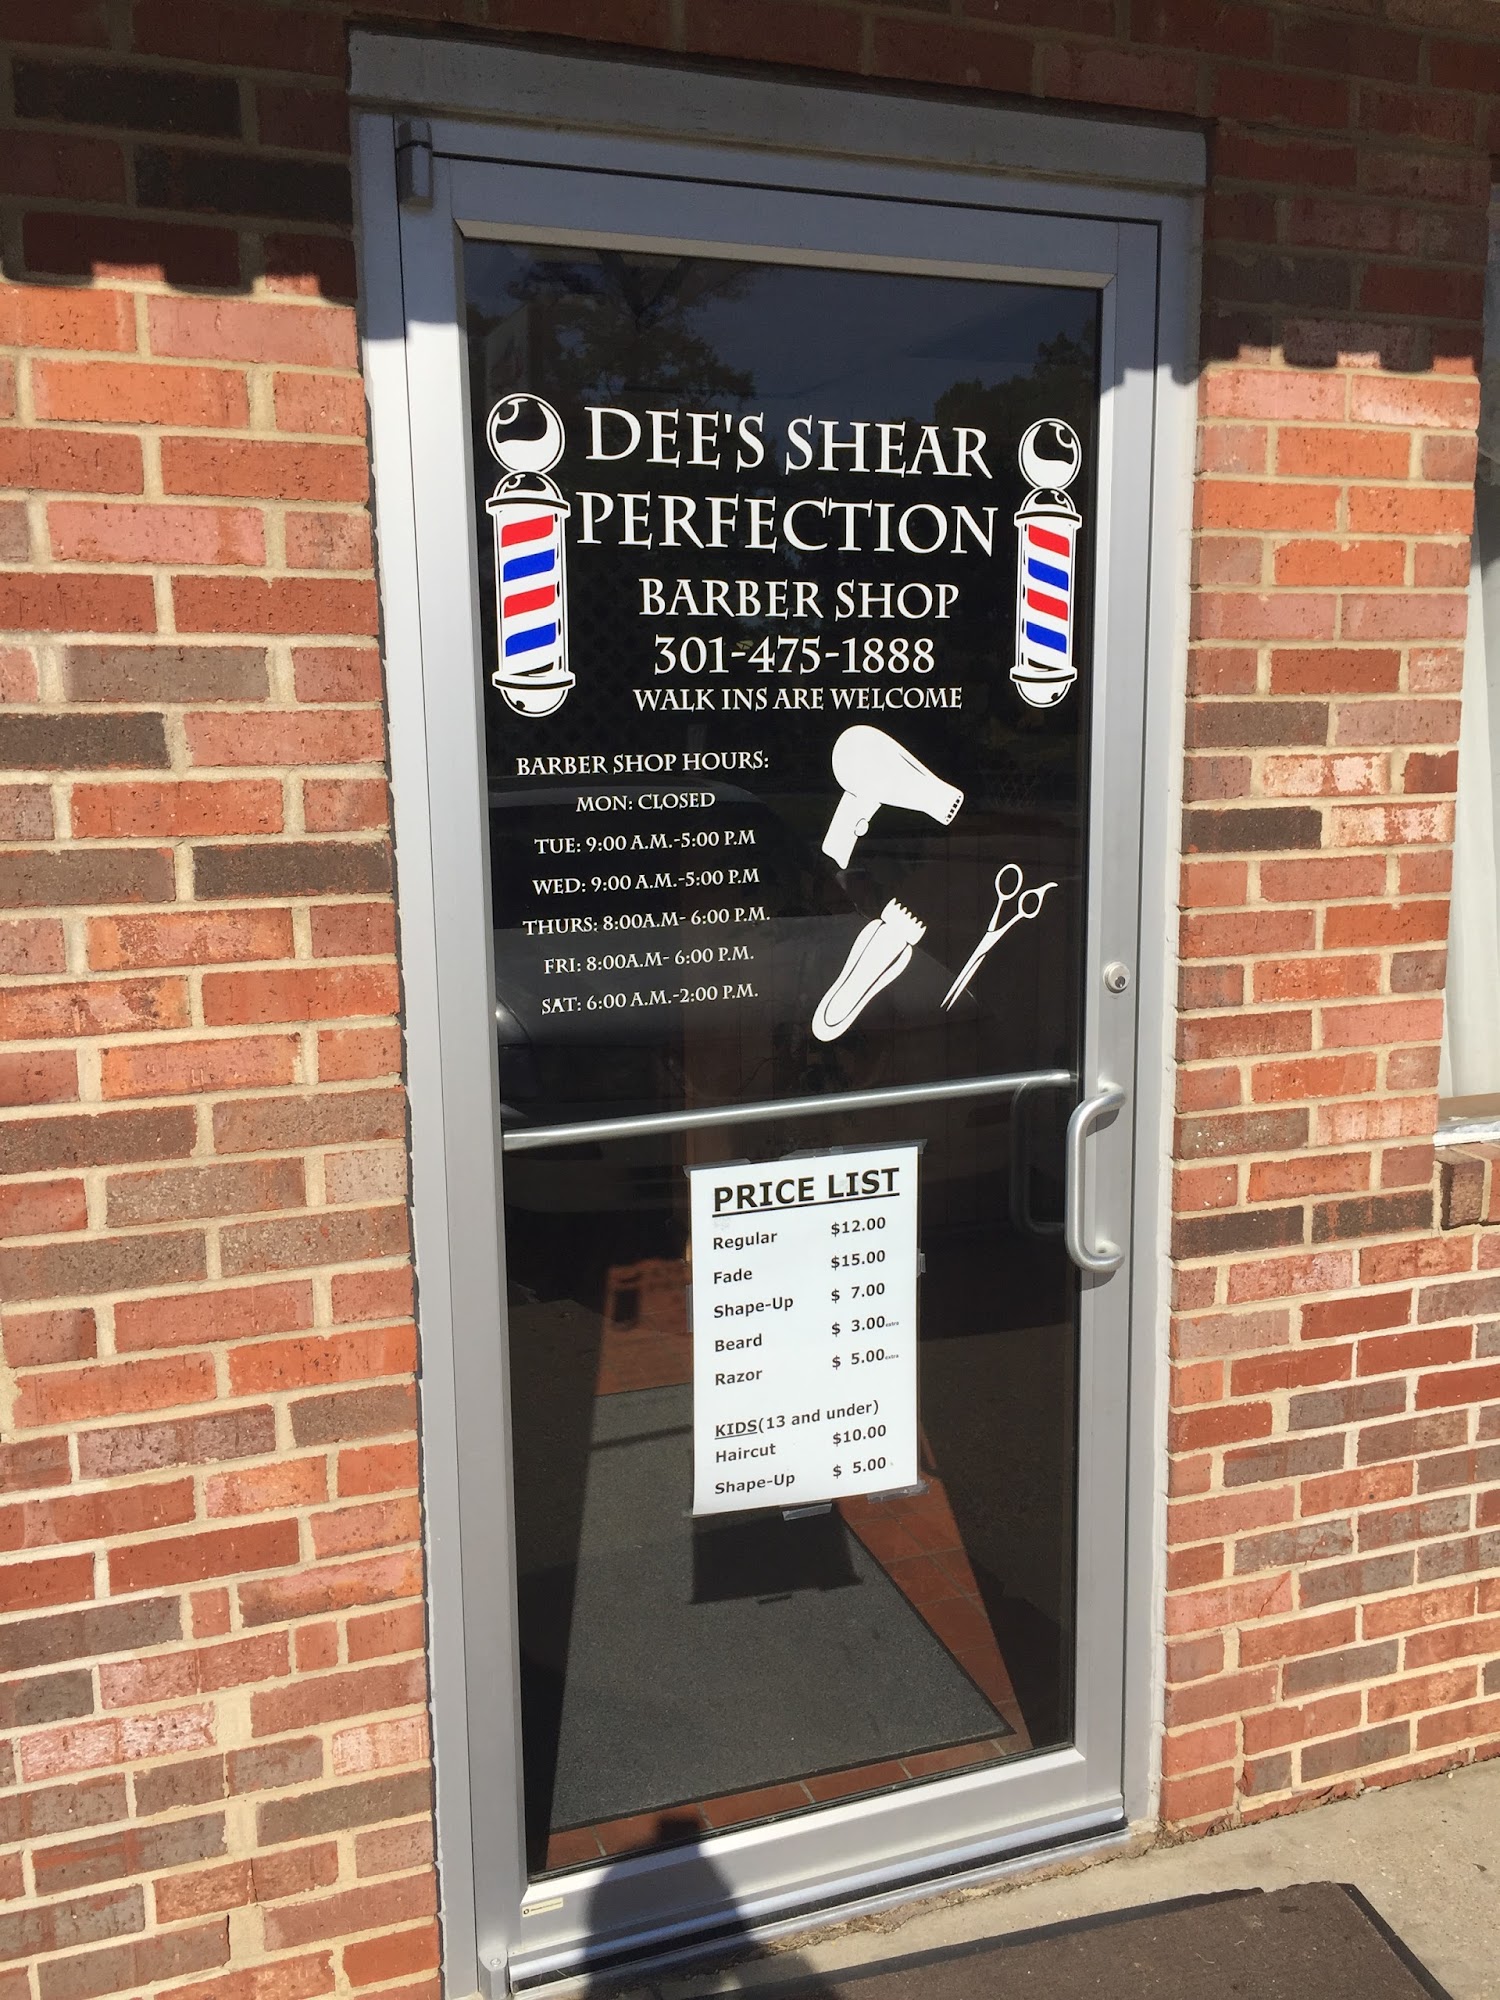 Dee's Shear Perfection 23952 Point Lookout Rd Unit C, Leonardtown Maryland 20650